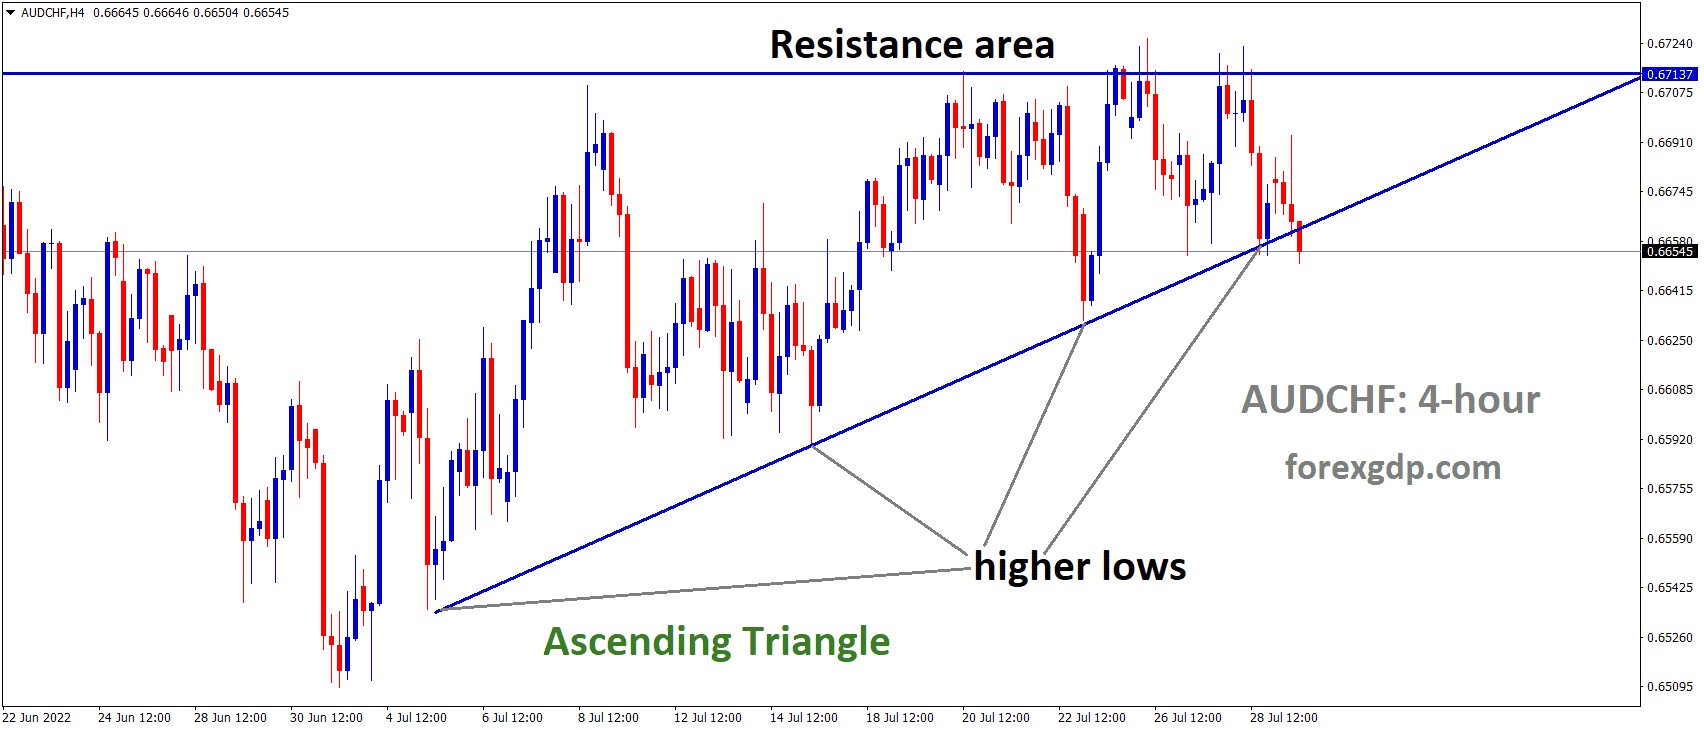 AUDCHF is moving in an Ascending triangle pattern and the market has reached the higher low area of the pattern.